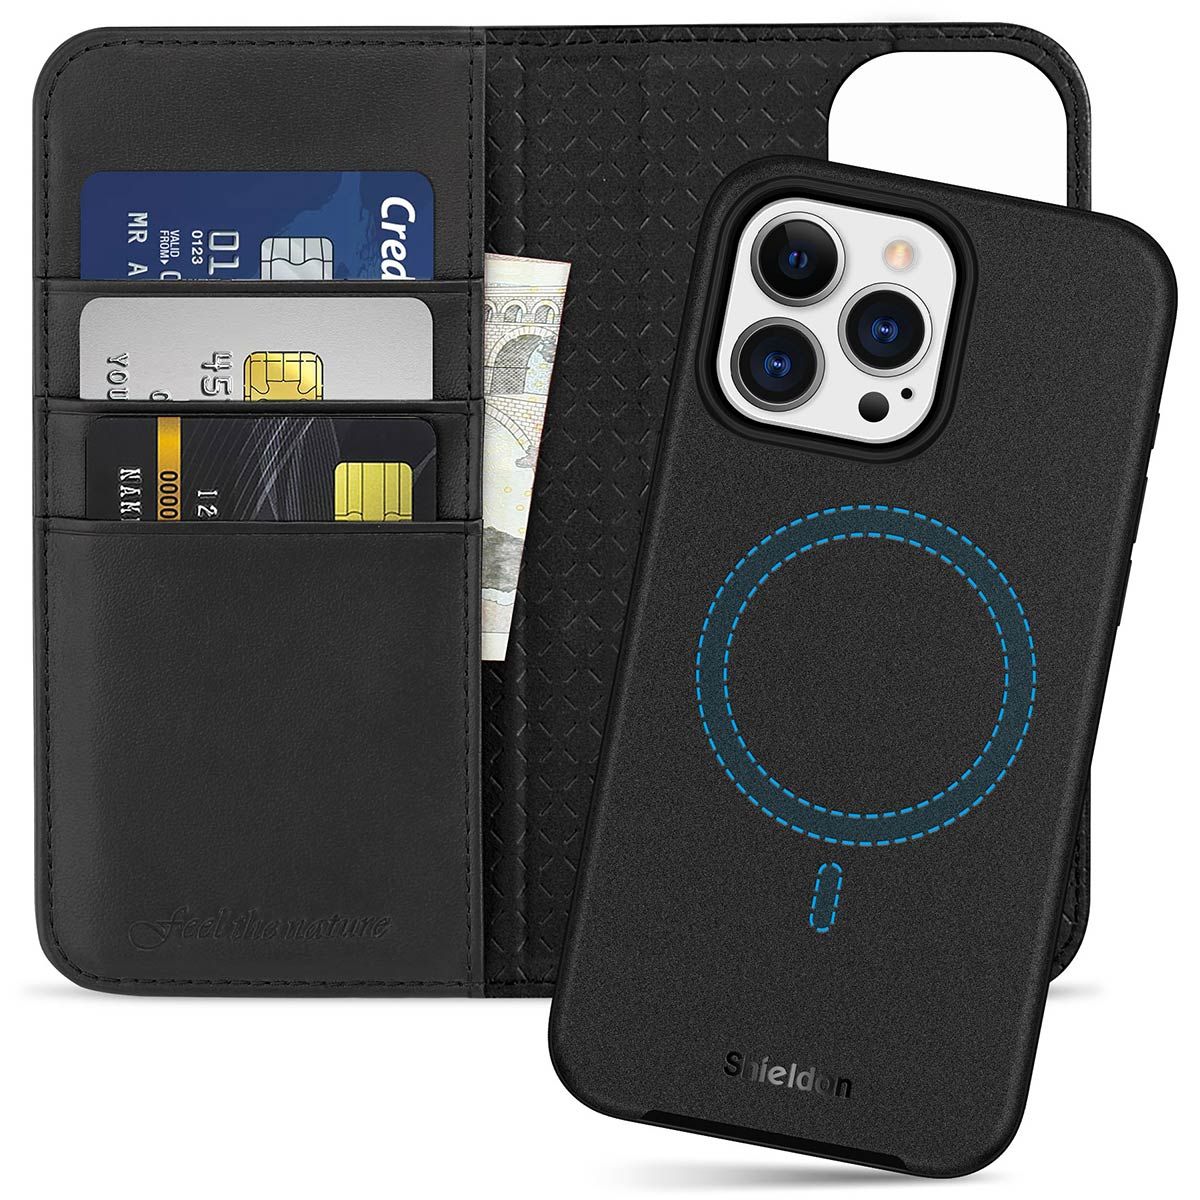 Leather iPhone 12 Pro Hard Cover - Compatible MagSafe